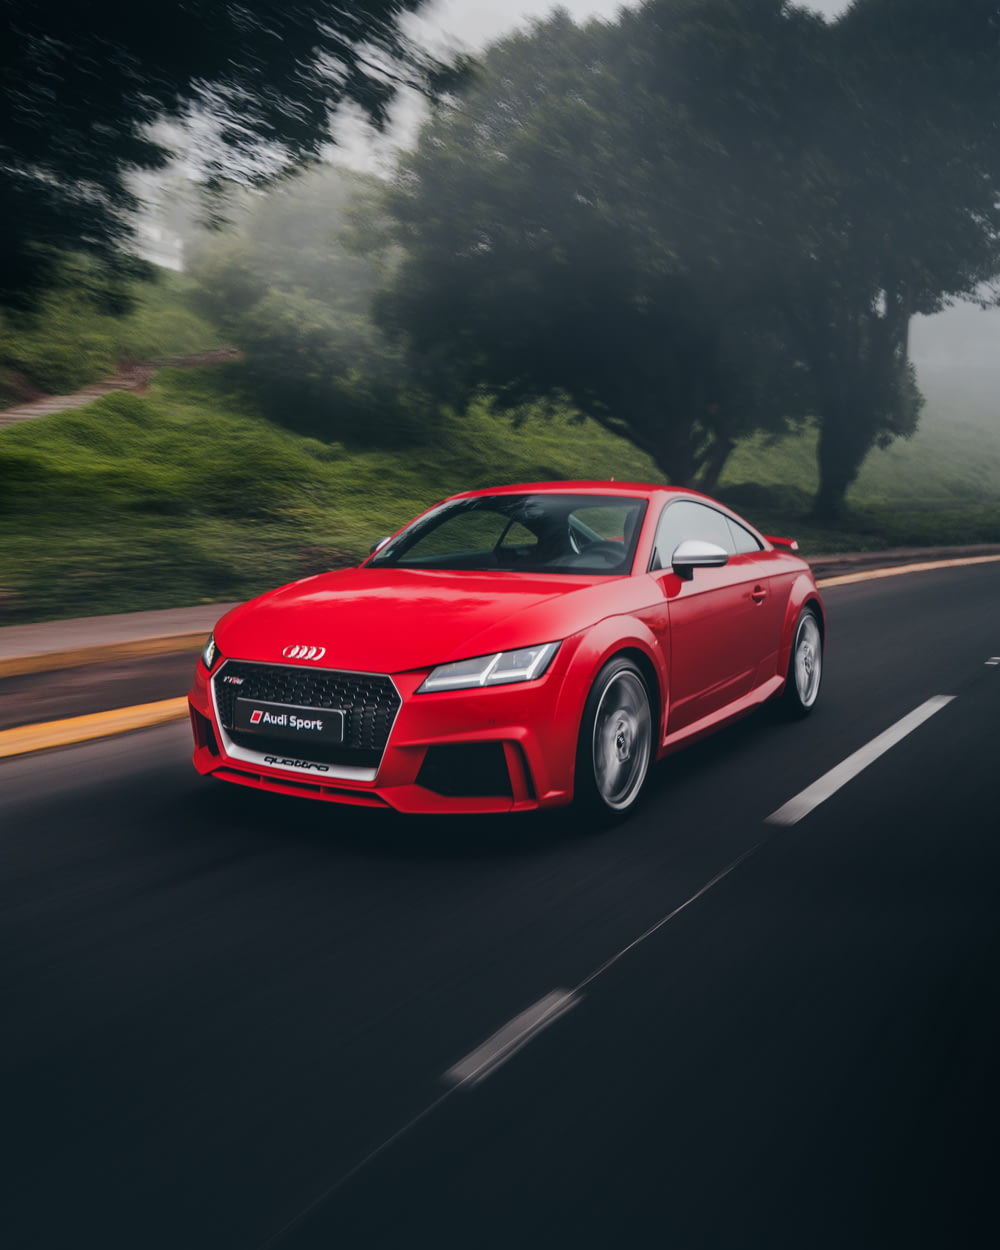 red Audi coupe on road near trees at daytime